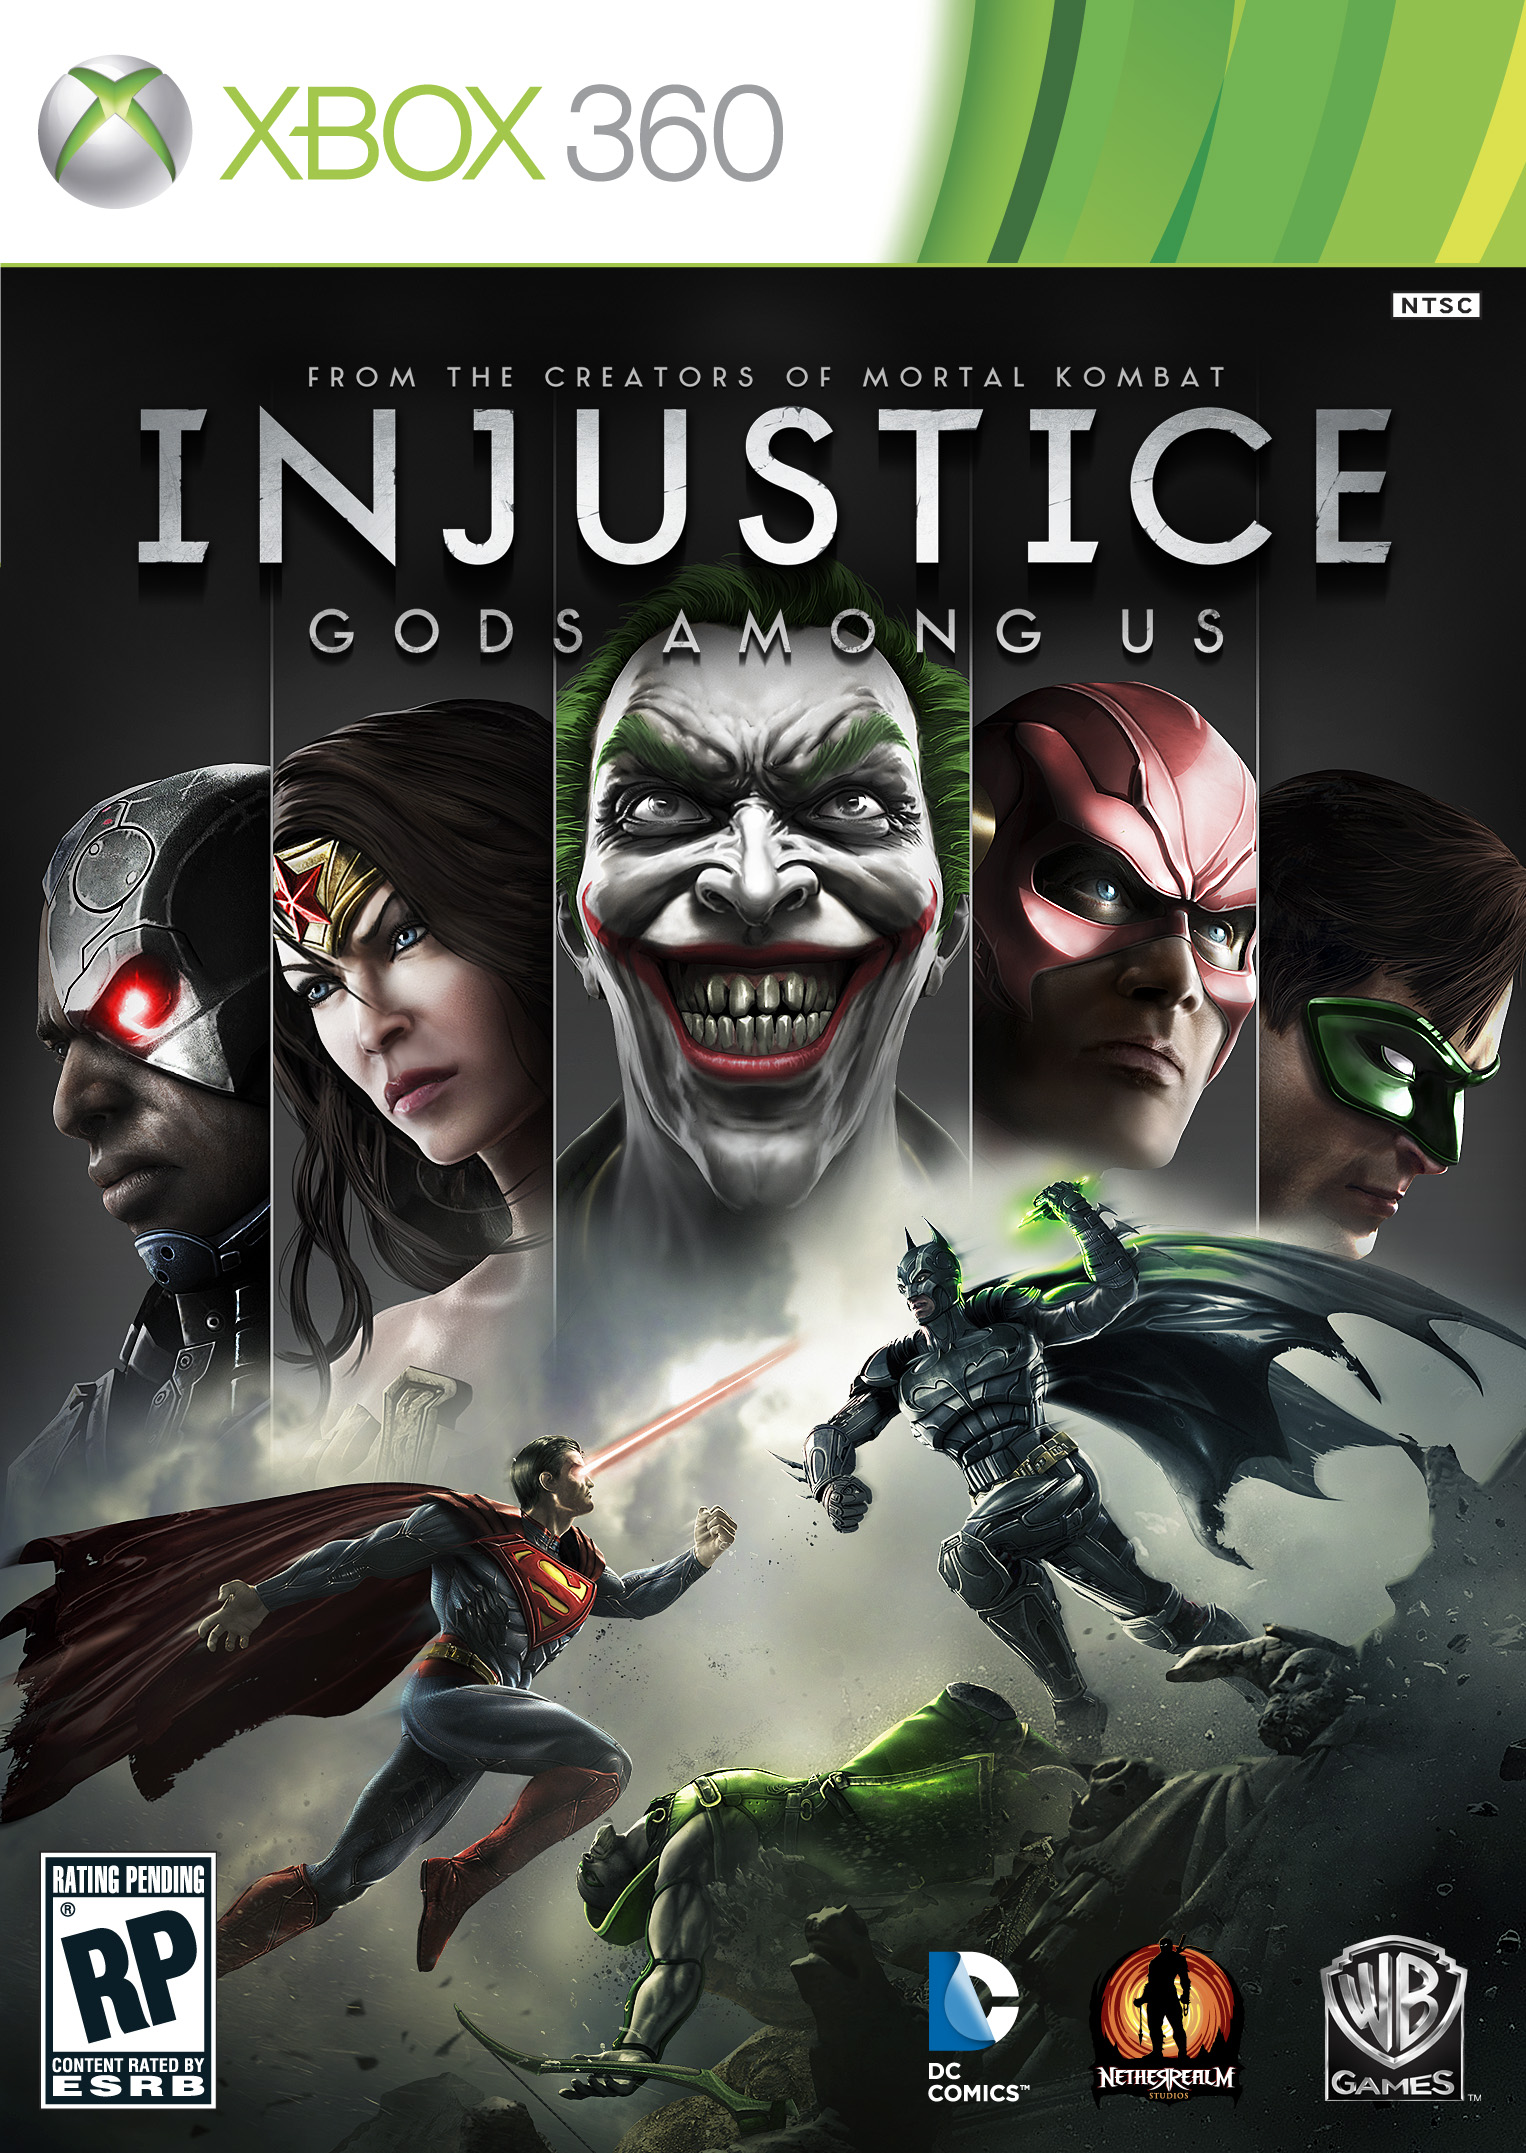 Injustice: Gods Among Us Xbox 360 Cover